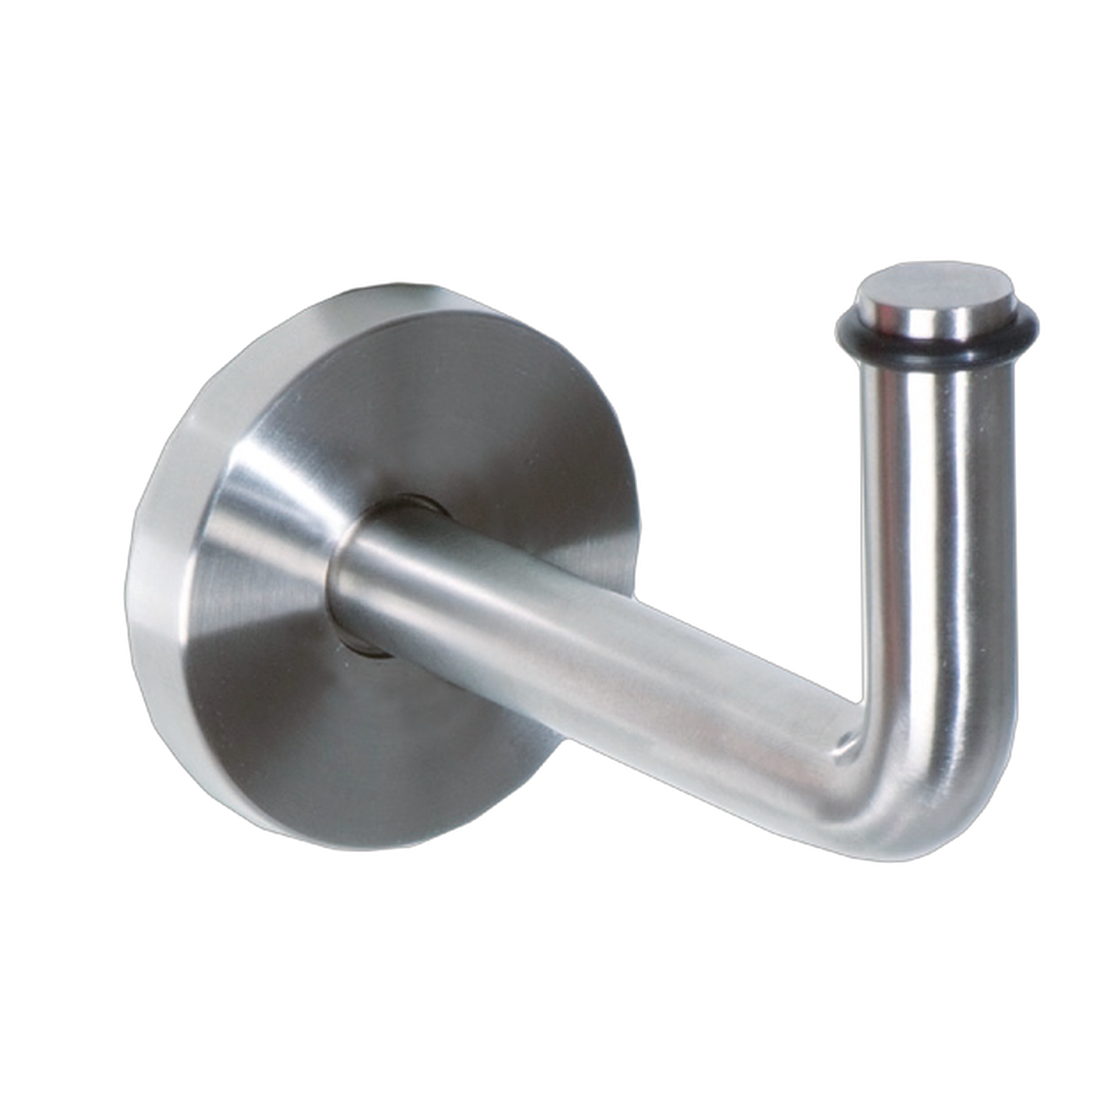 Door stopper, curved hook ø 12mm, mounting plate